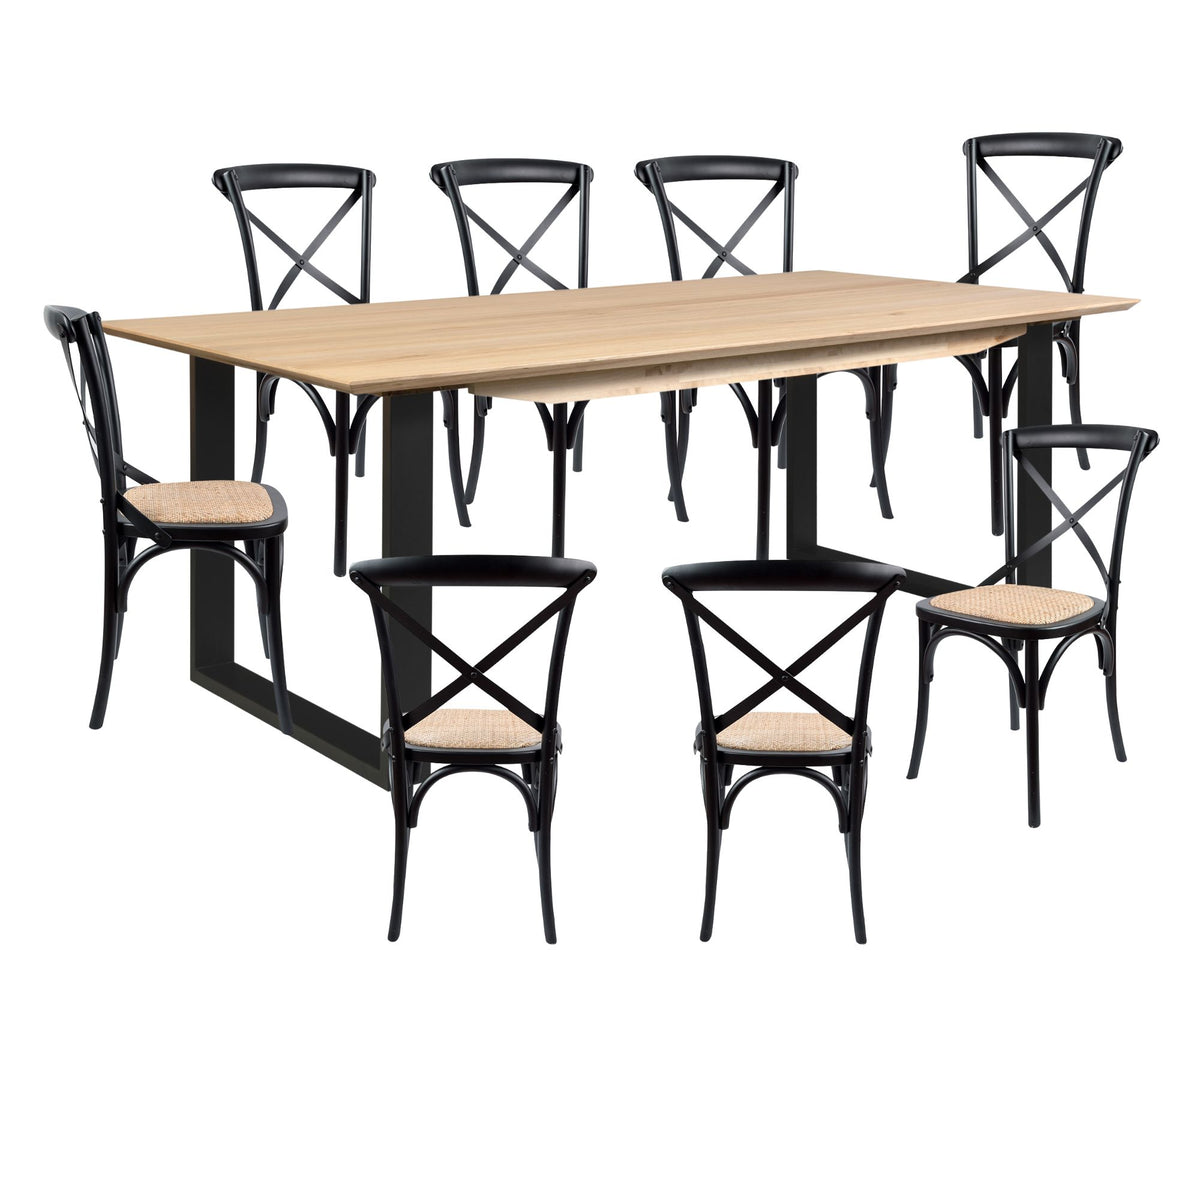 Aconite 9pc 210cm Dining Table Set 8 Cross Back Chair Solid Messmate Timber Wood